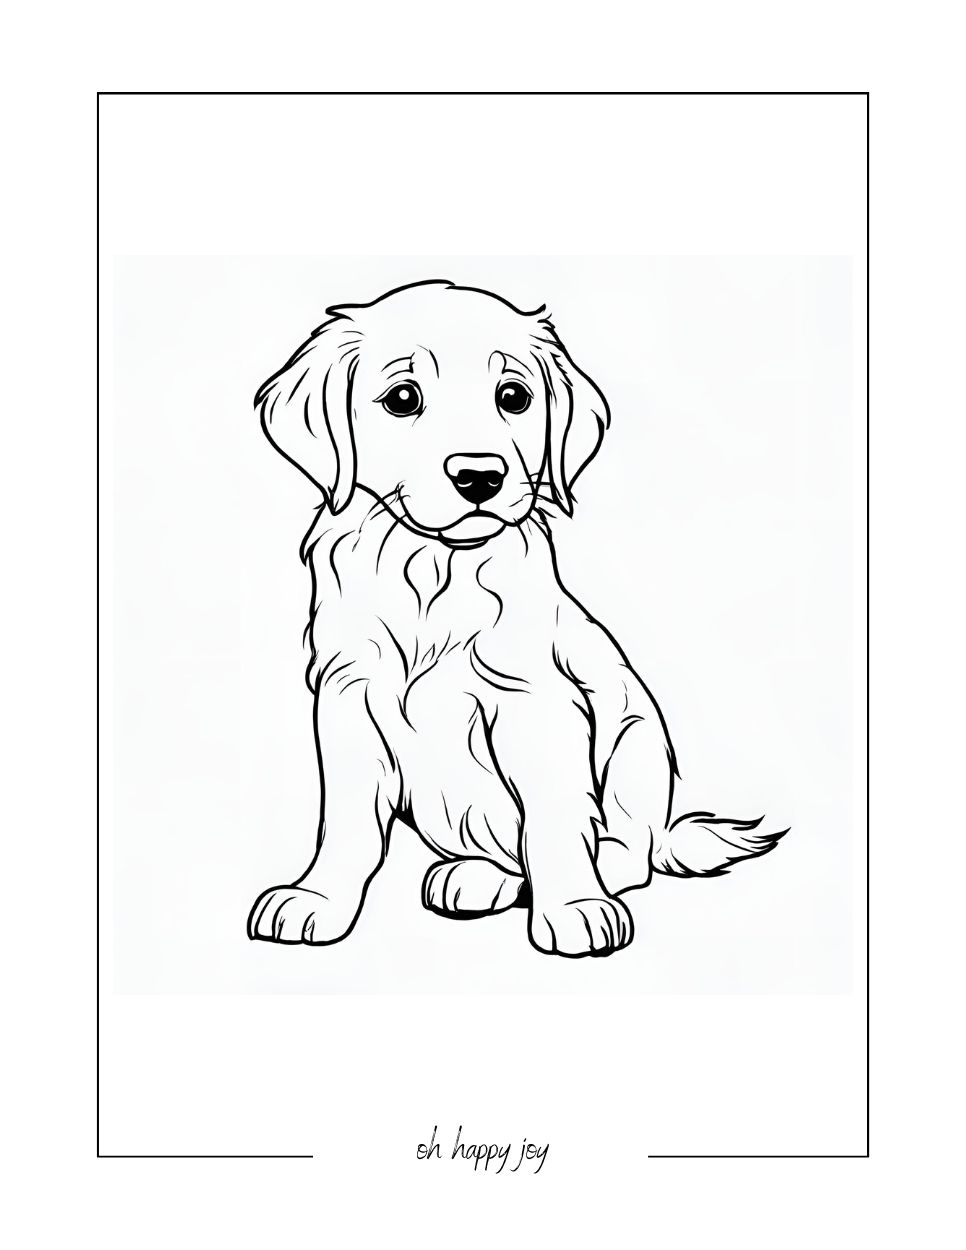 puppy golden retriever coloring page